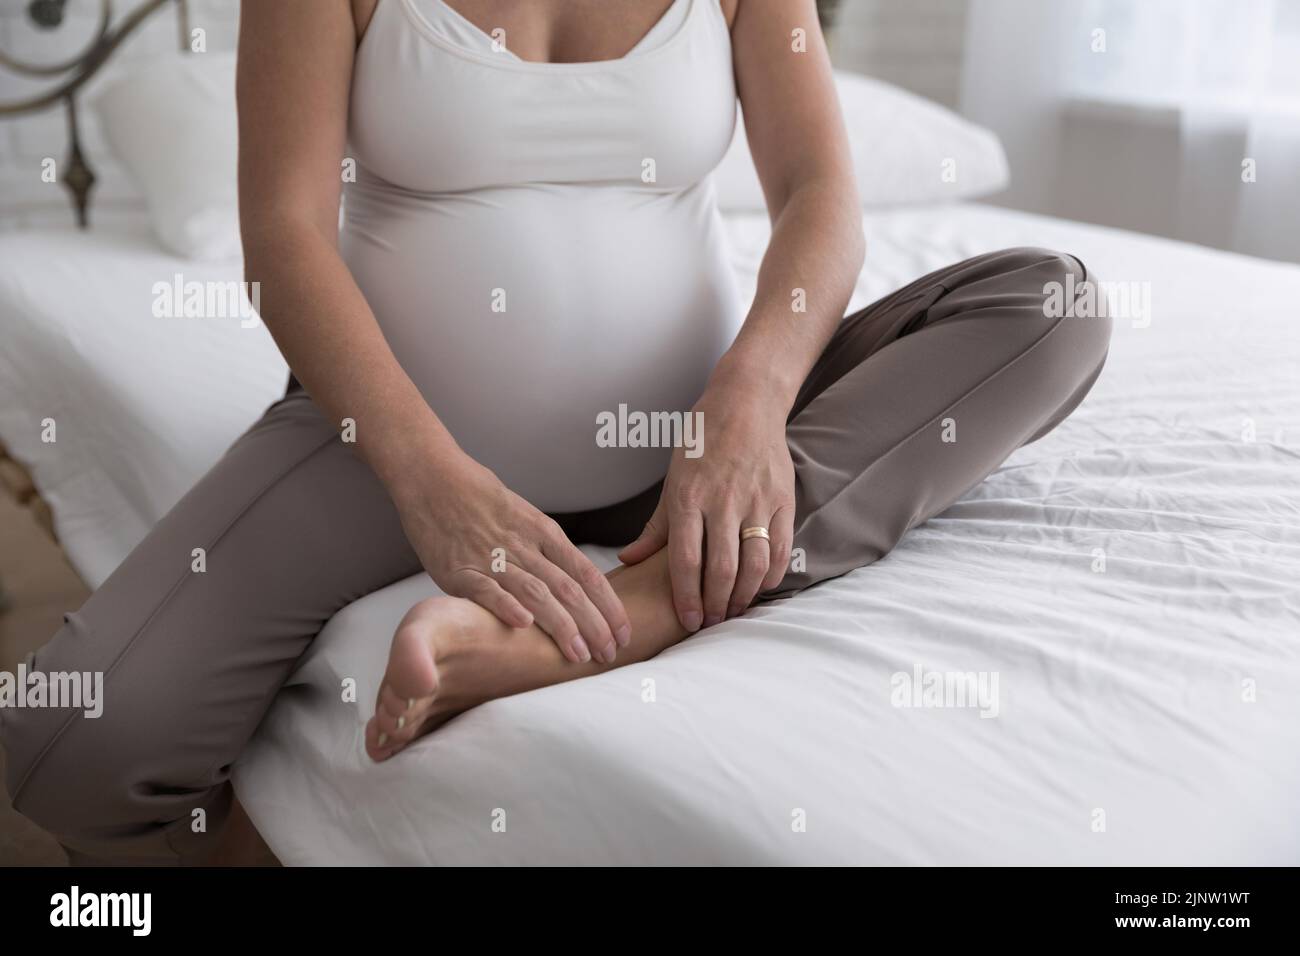 Pregnant woman sits on bed touch her aching ankle Stock Photo